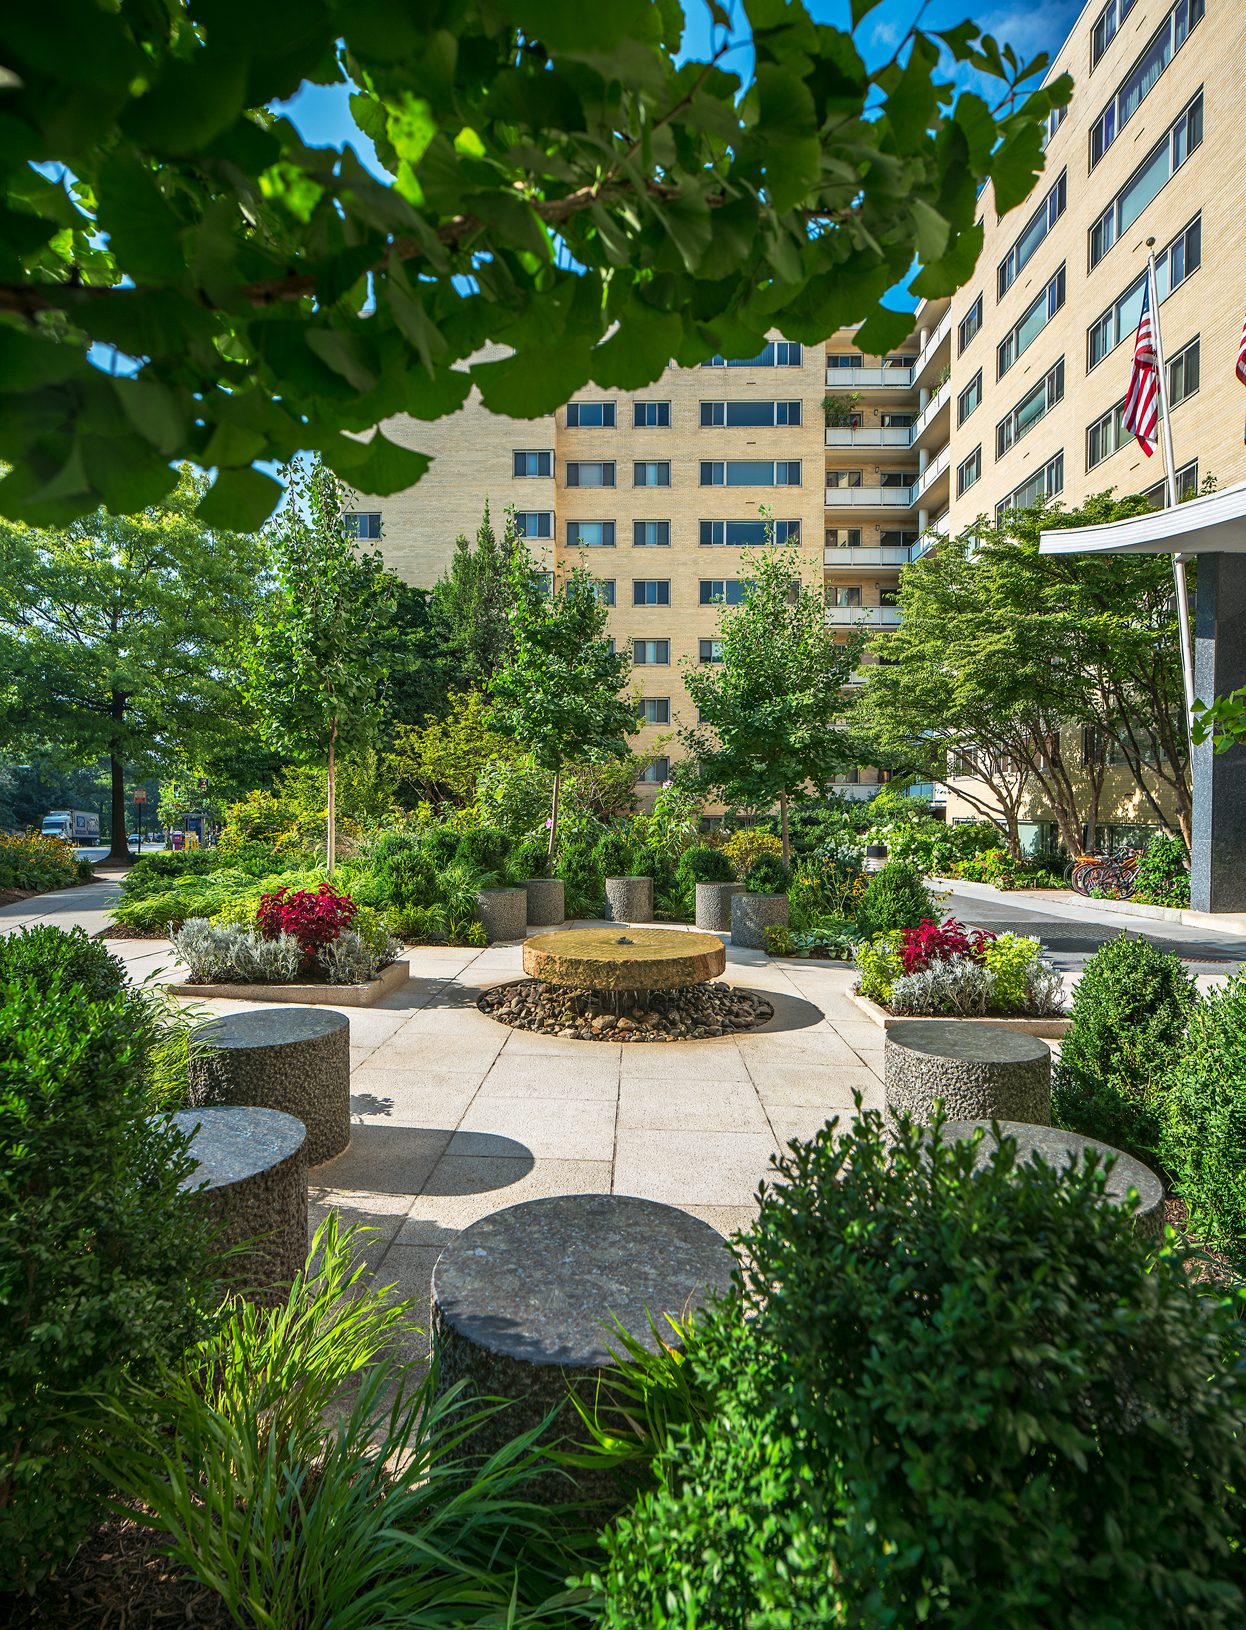   Project Location:  Washington, DC (North Cleveland Park)  Completion:  Summer 2015  General Contractor:  Denchfield Landscaping  Image By:  Allen Russ 